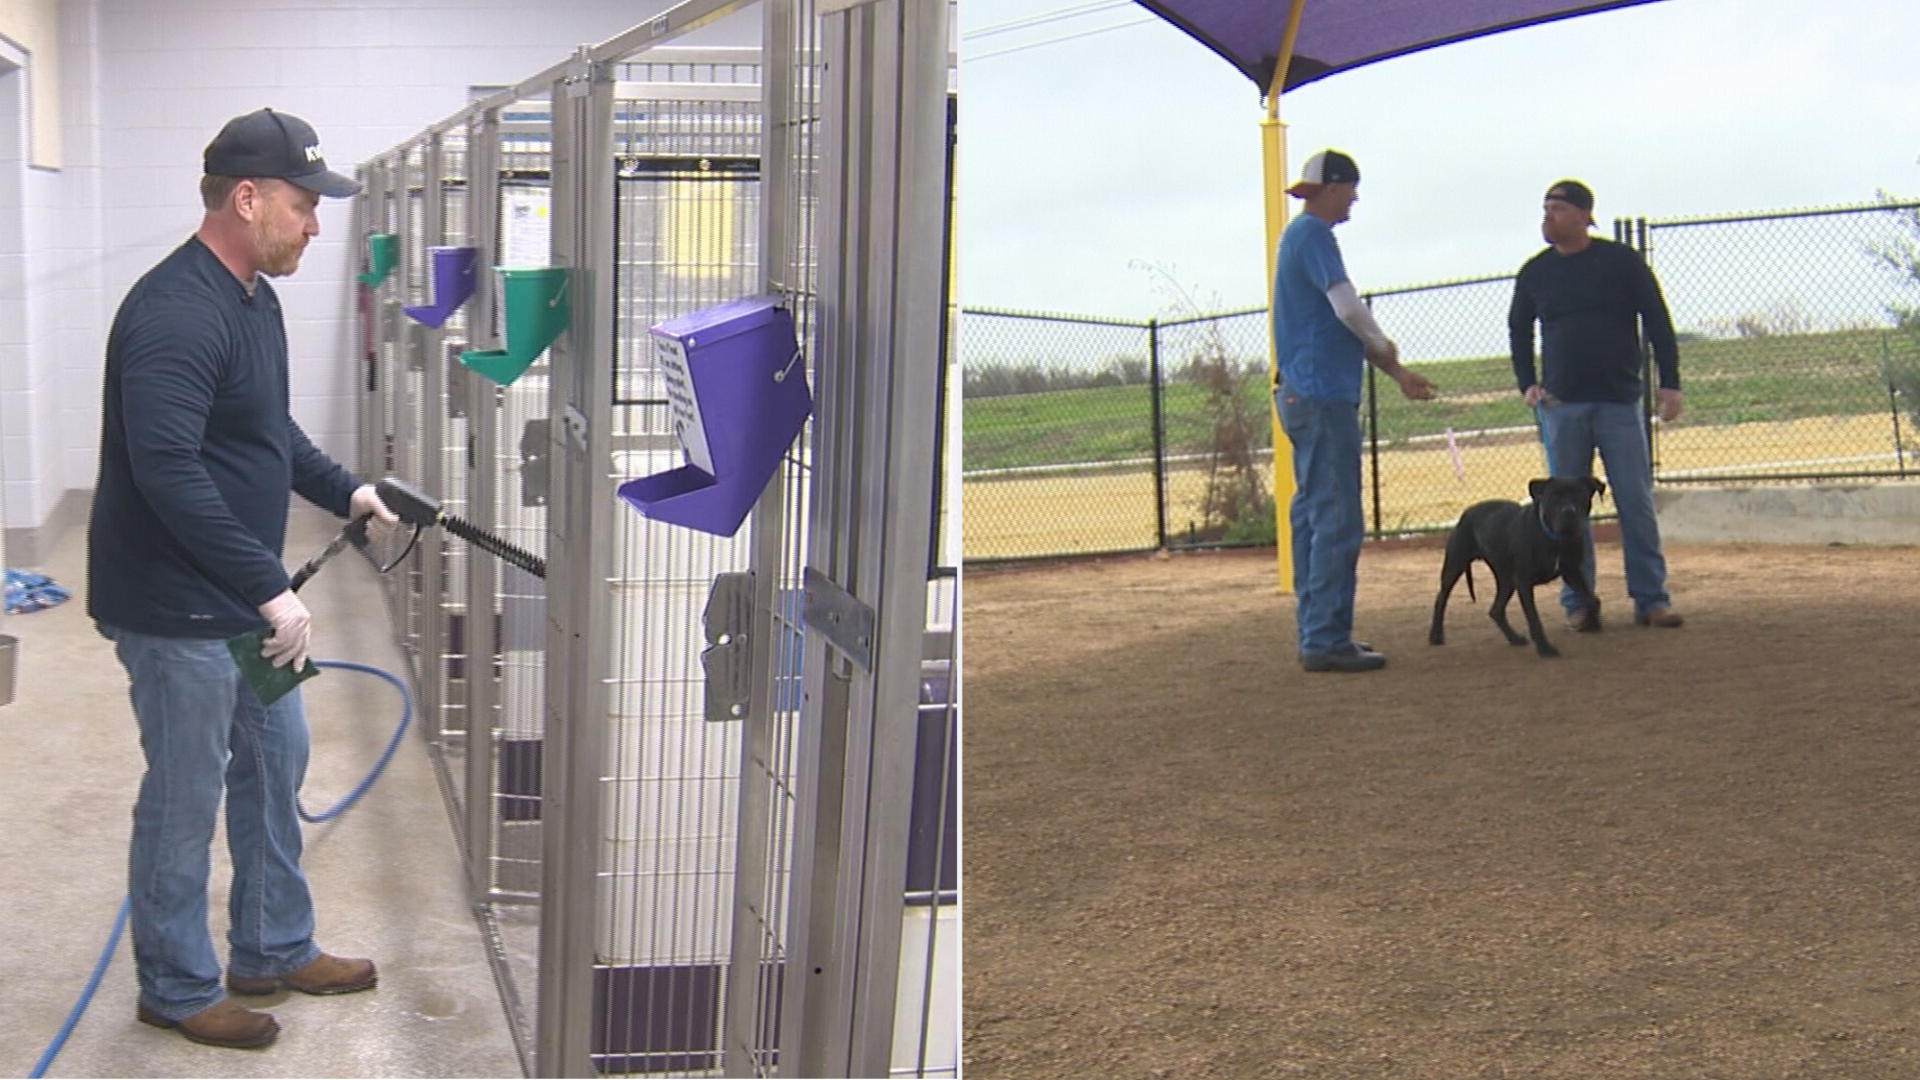 Bryan Mays learned how to clean the kennels and walk the pets at the shelter in this week's Take This Job.